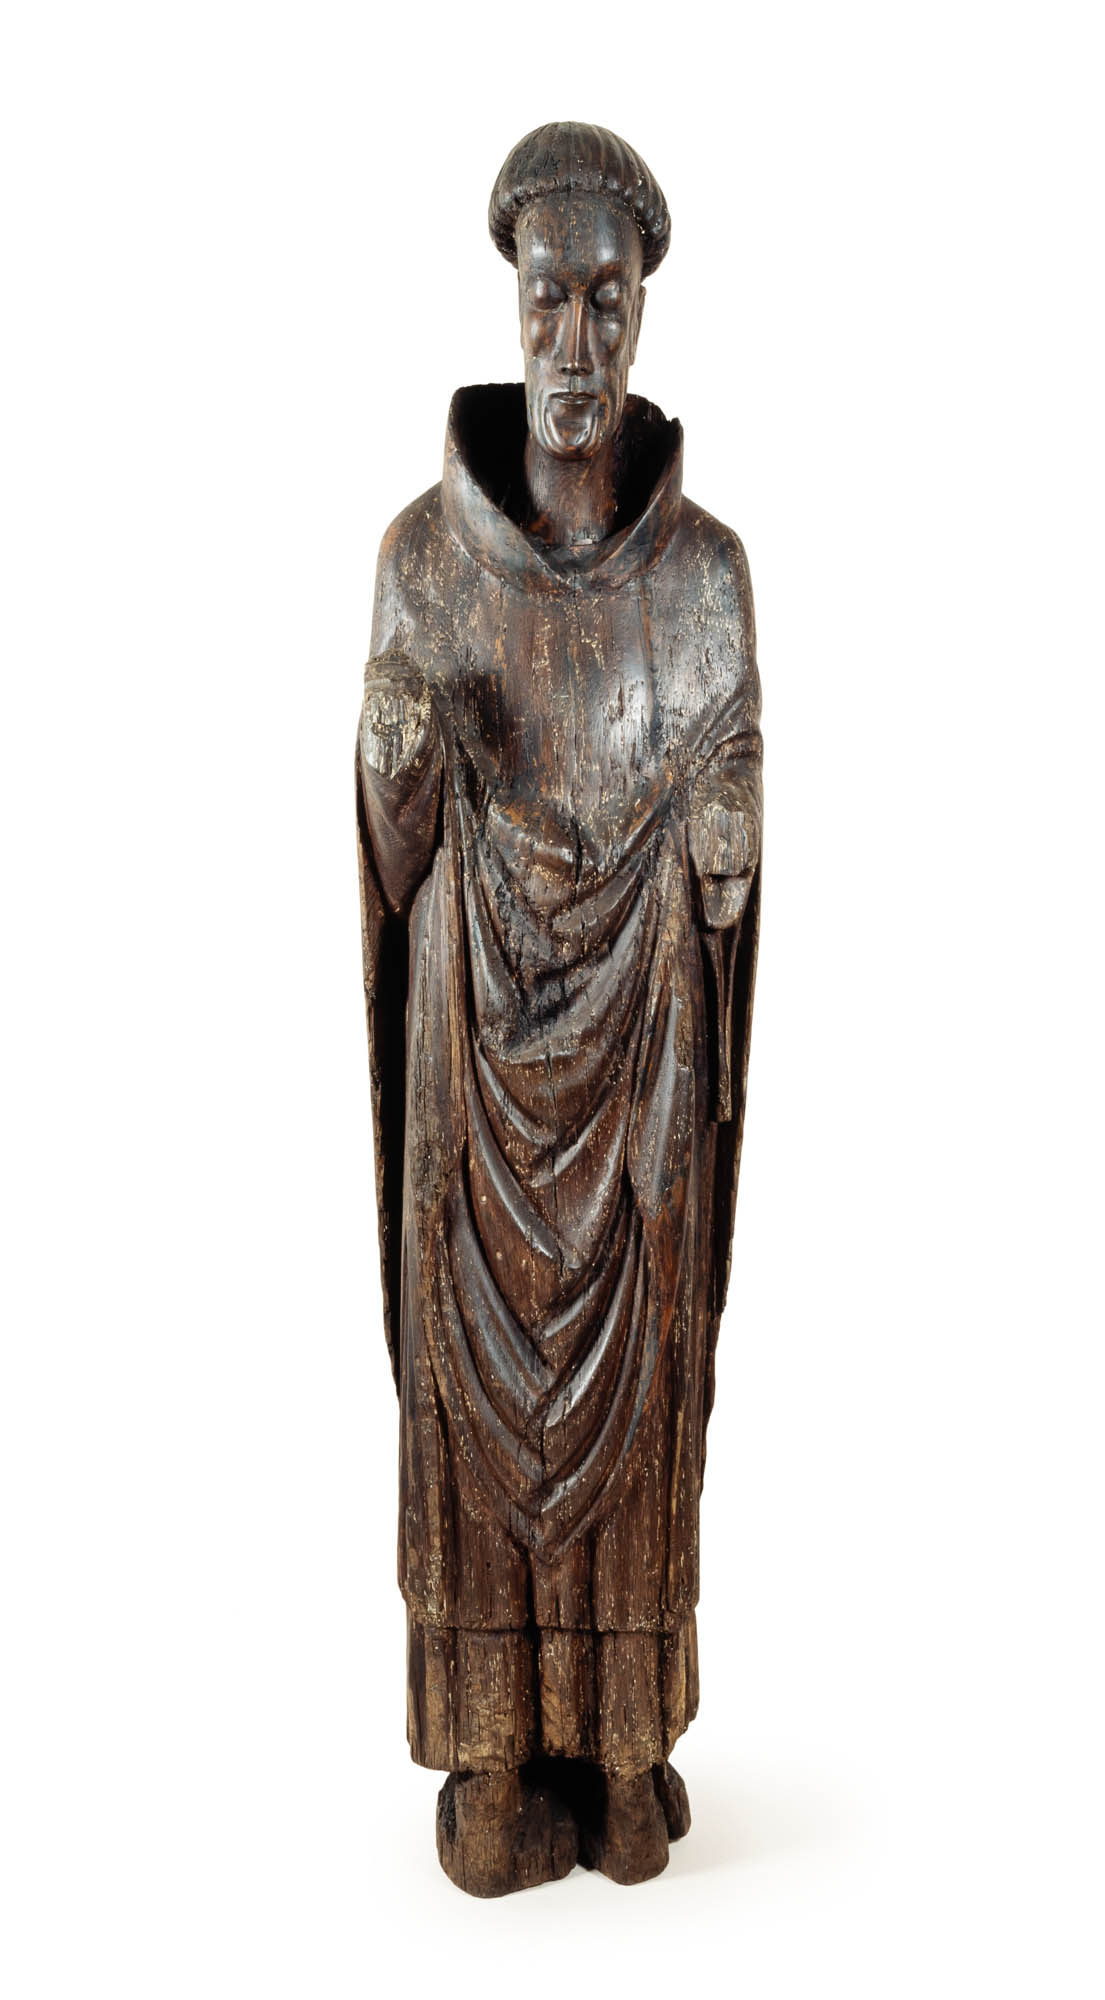 Dark wooden statue of gaunt bearded saint in flowing robes that is missing both arms.